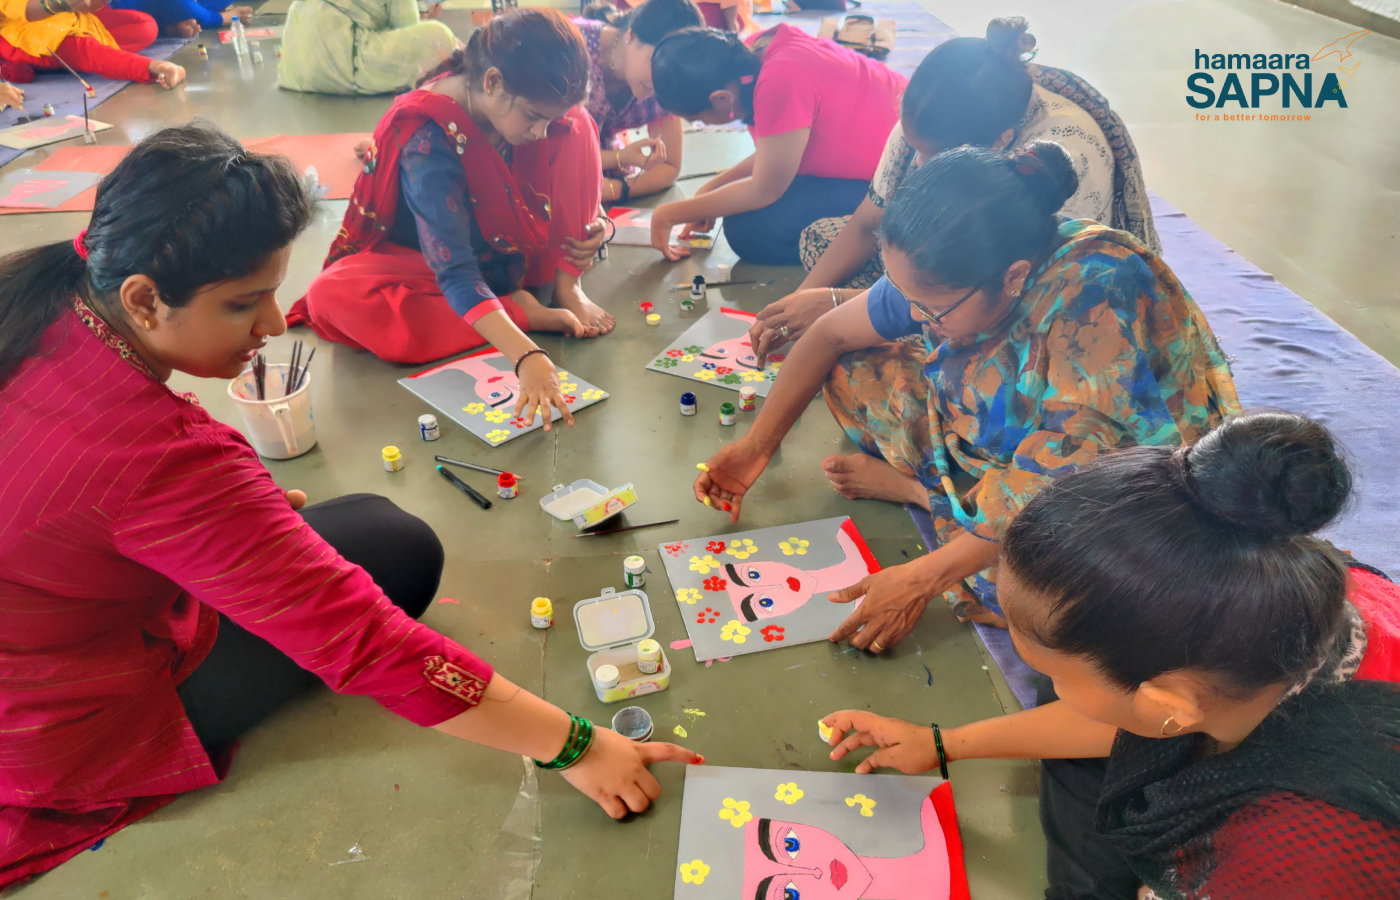 Painting on canvas is a joy which the ladies learnt when they made a beautiful portrait of a lady with flowers